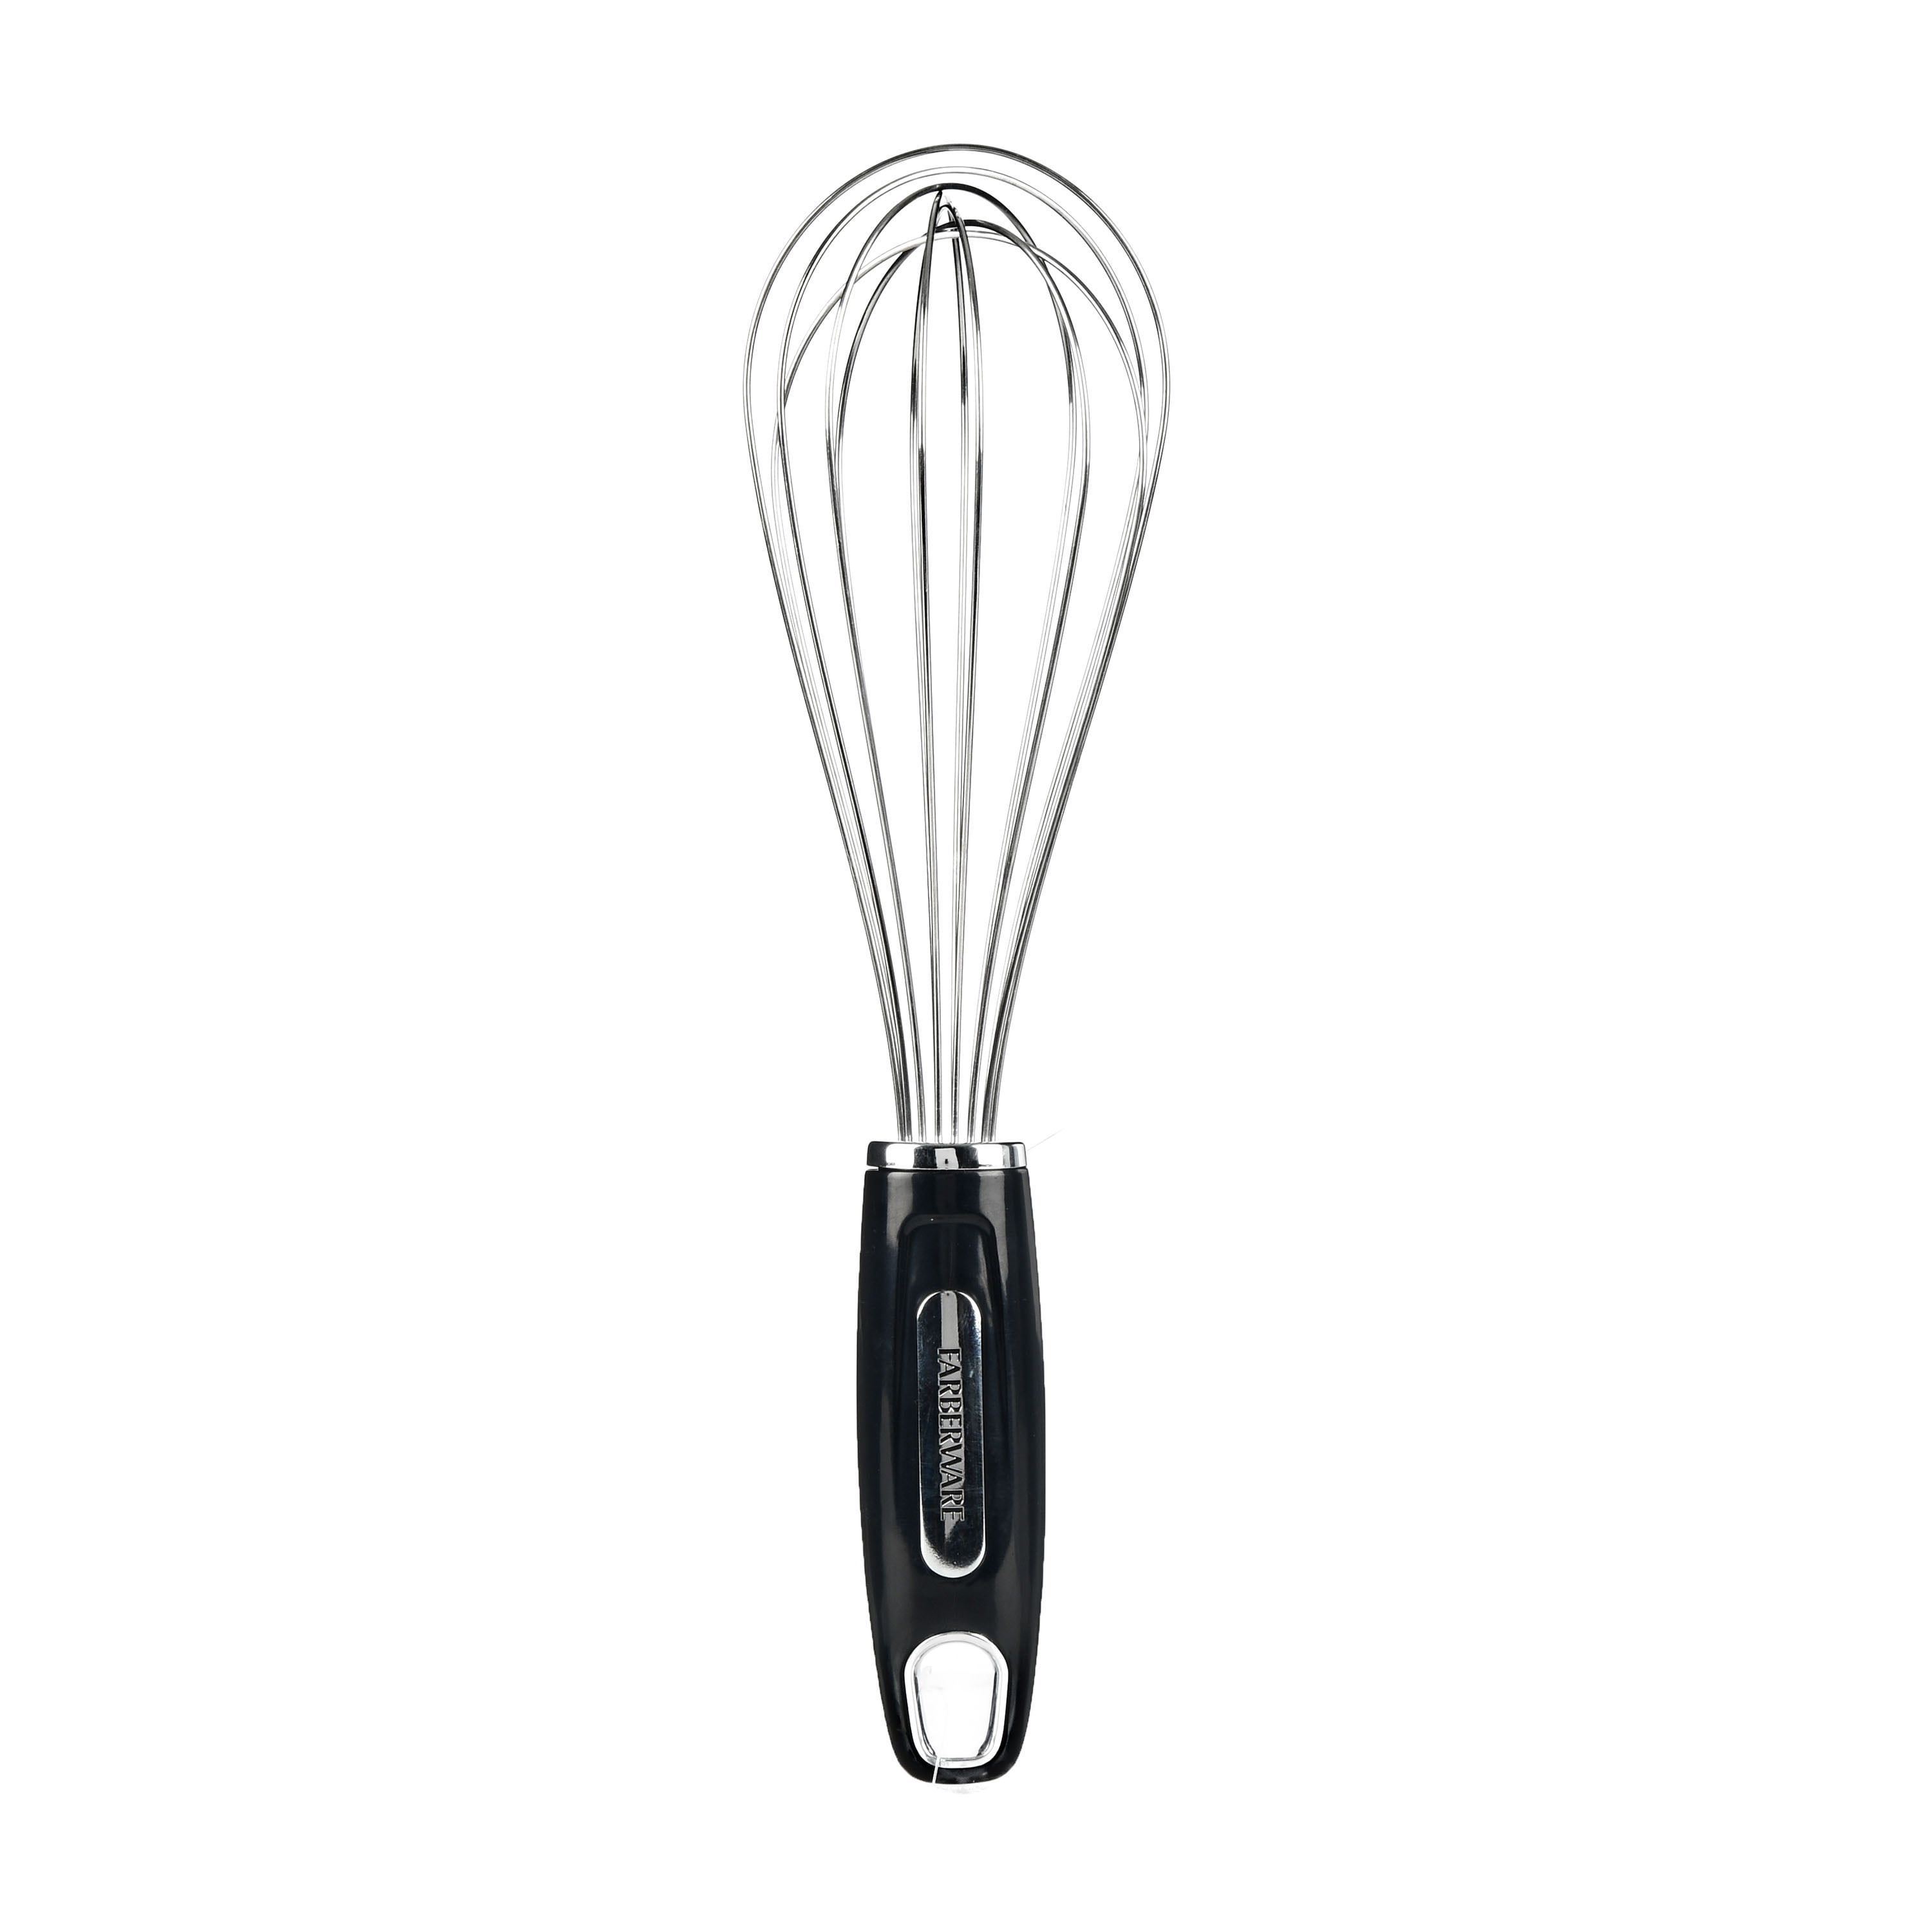 Kinggrand Kitchen Stainless Steel Wire Whisk Egg Beater, Sturdy Kitchen  Tool Steel for Whisking Blending Beating Stirring Whisks for Cooking White